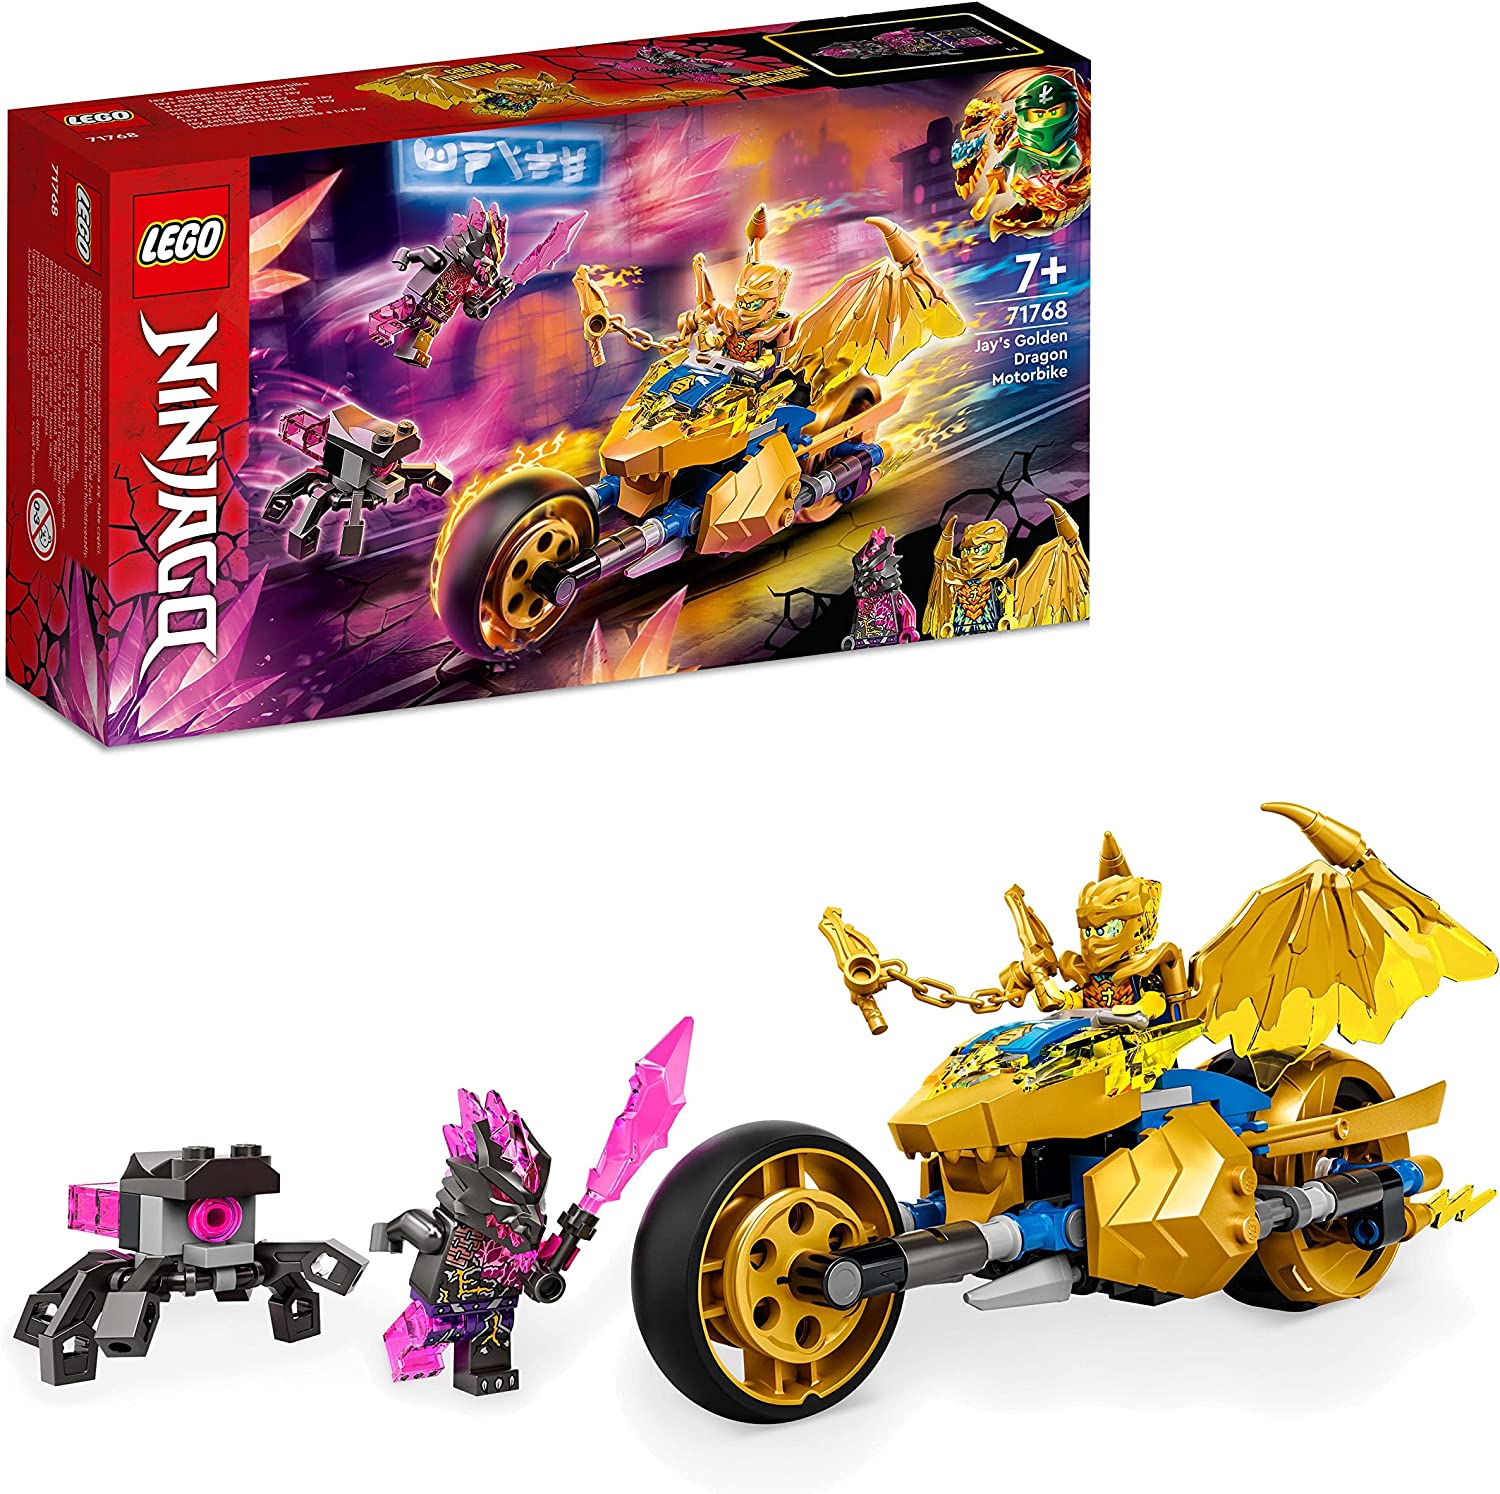 LEGO 71768 NINJAGO Jays Gold Dragon Motorcycle Set with Jay Mini Figure and Dragon and Snake Figures, Toy for Children from 7 Years